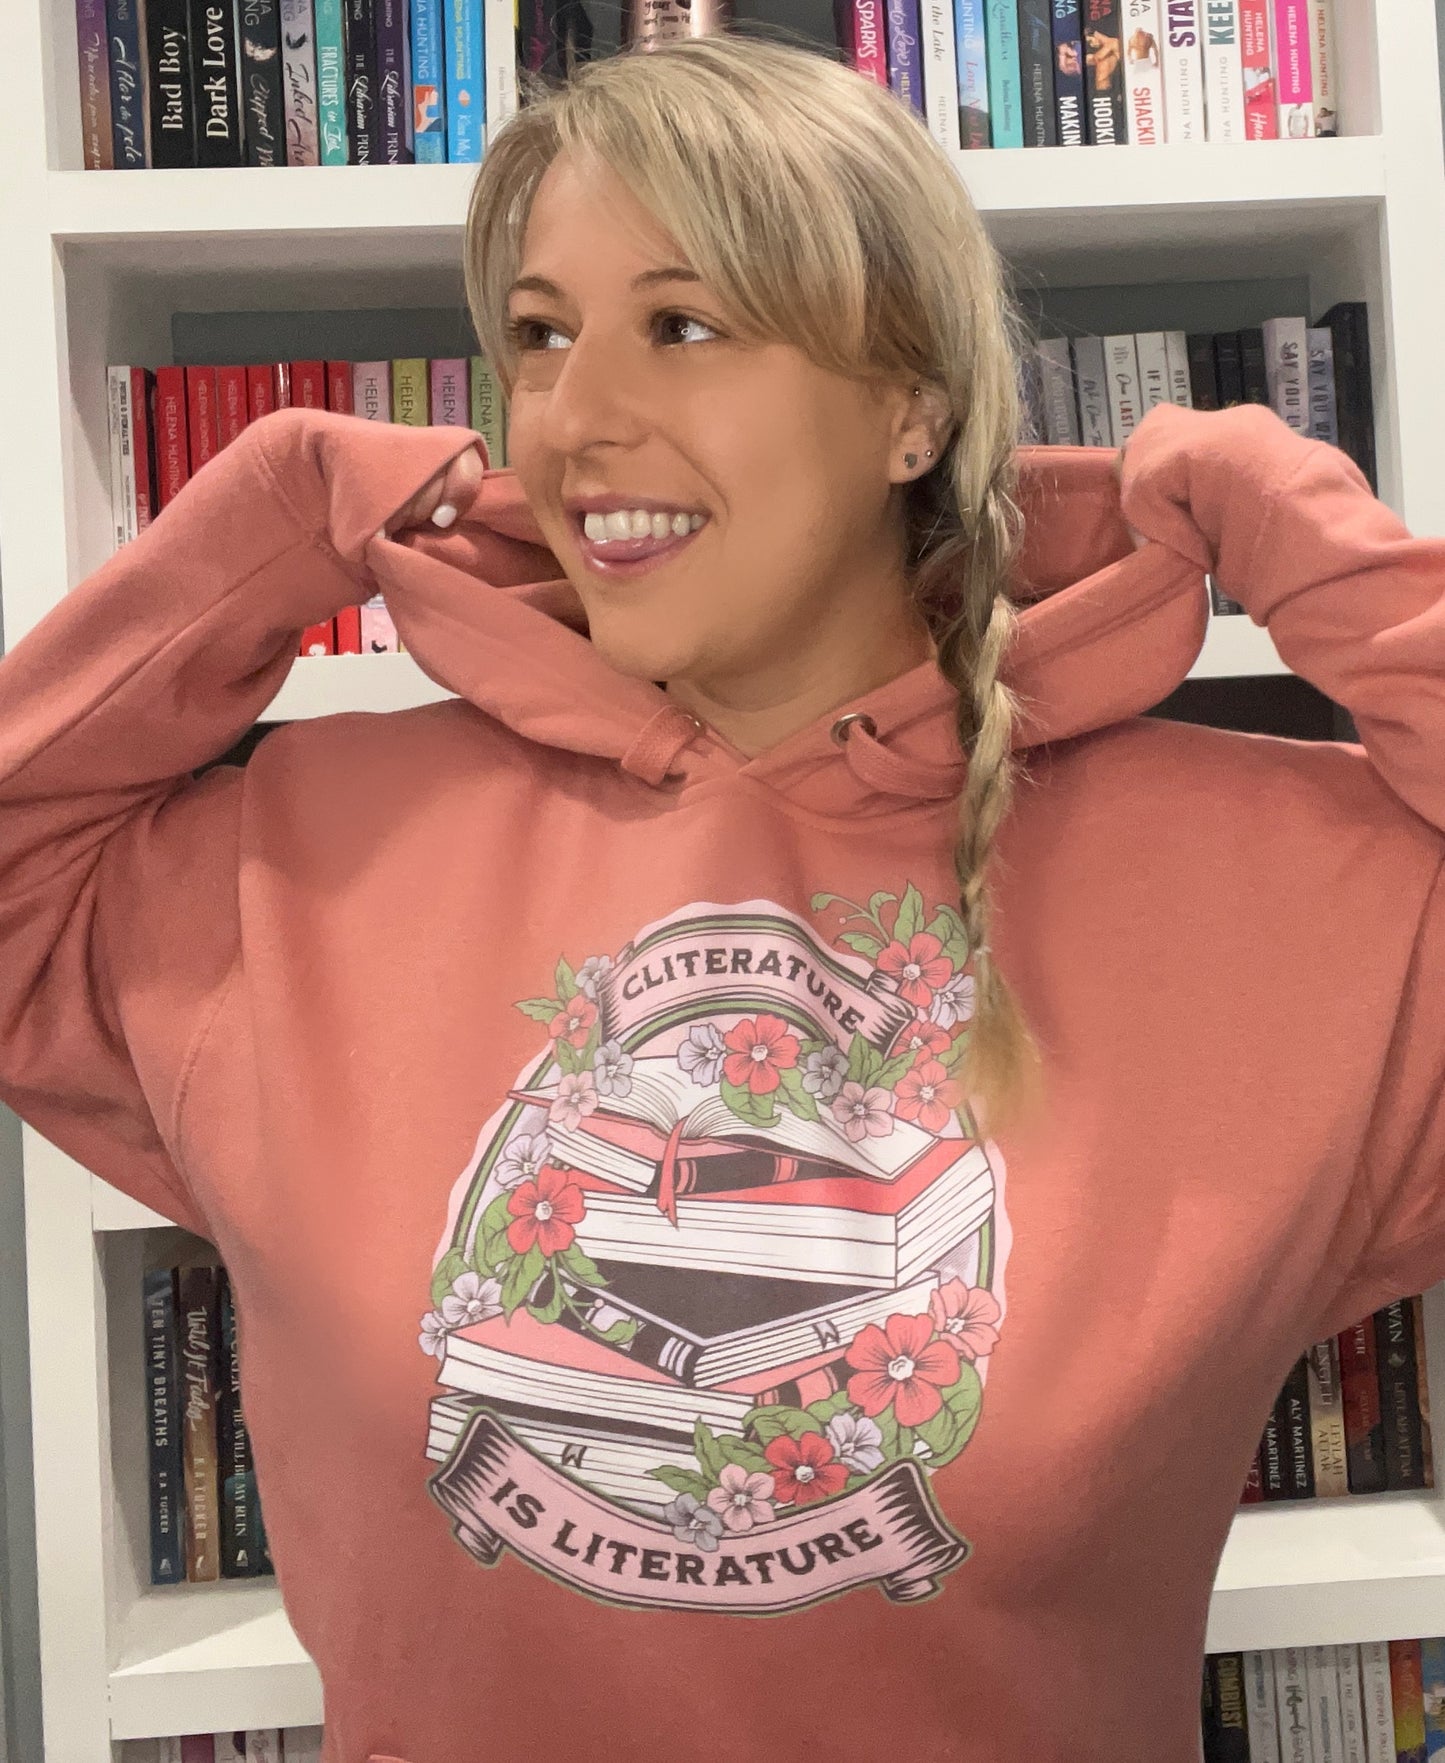 Cliterature is Literature Spring Bookstack Unisex Hoodie *NEW BRAND - CHECK SIZING*